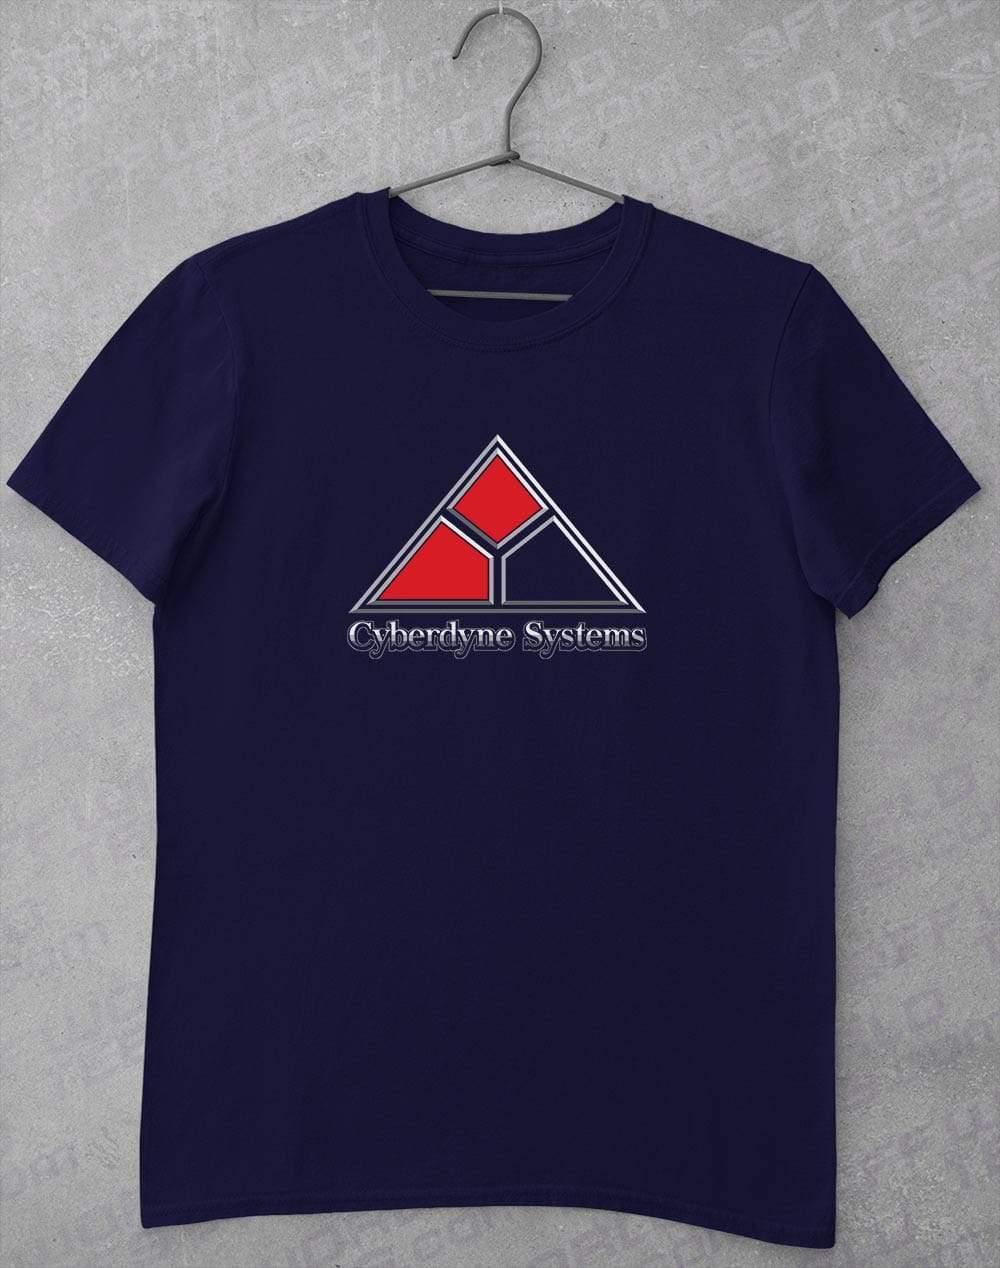 Cyberdyne Systems T-Shirt S / Navy  - Off World Tees